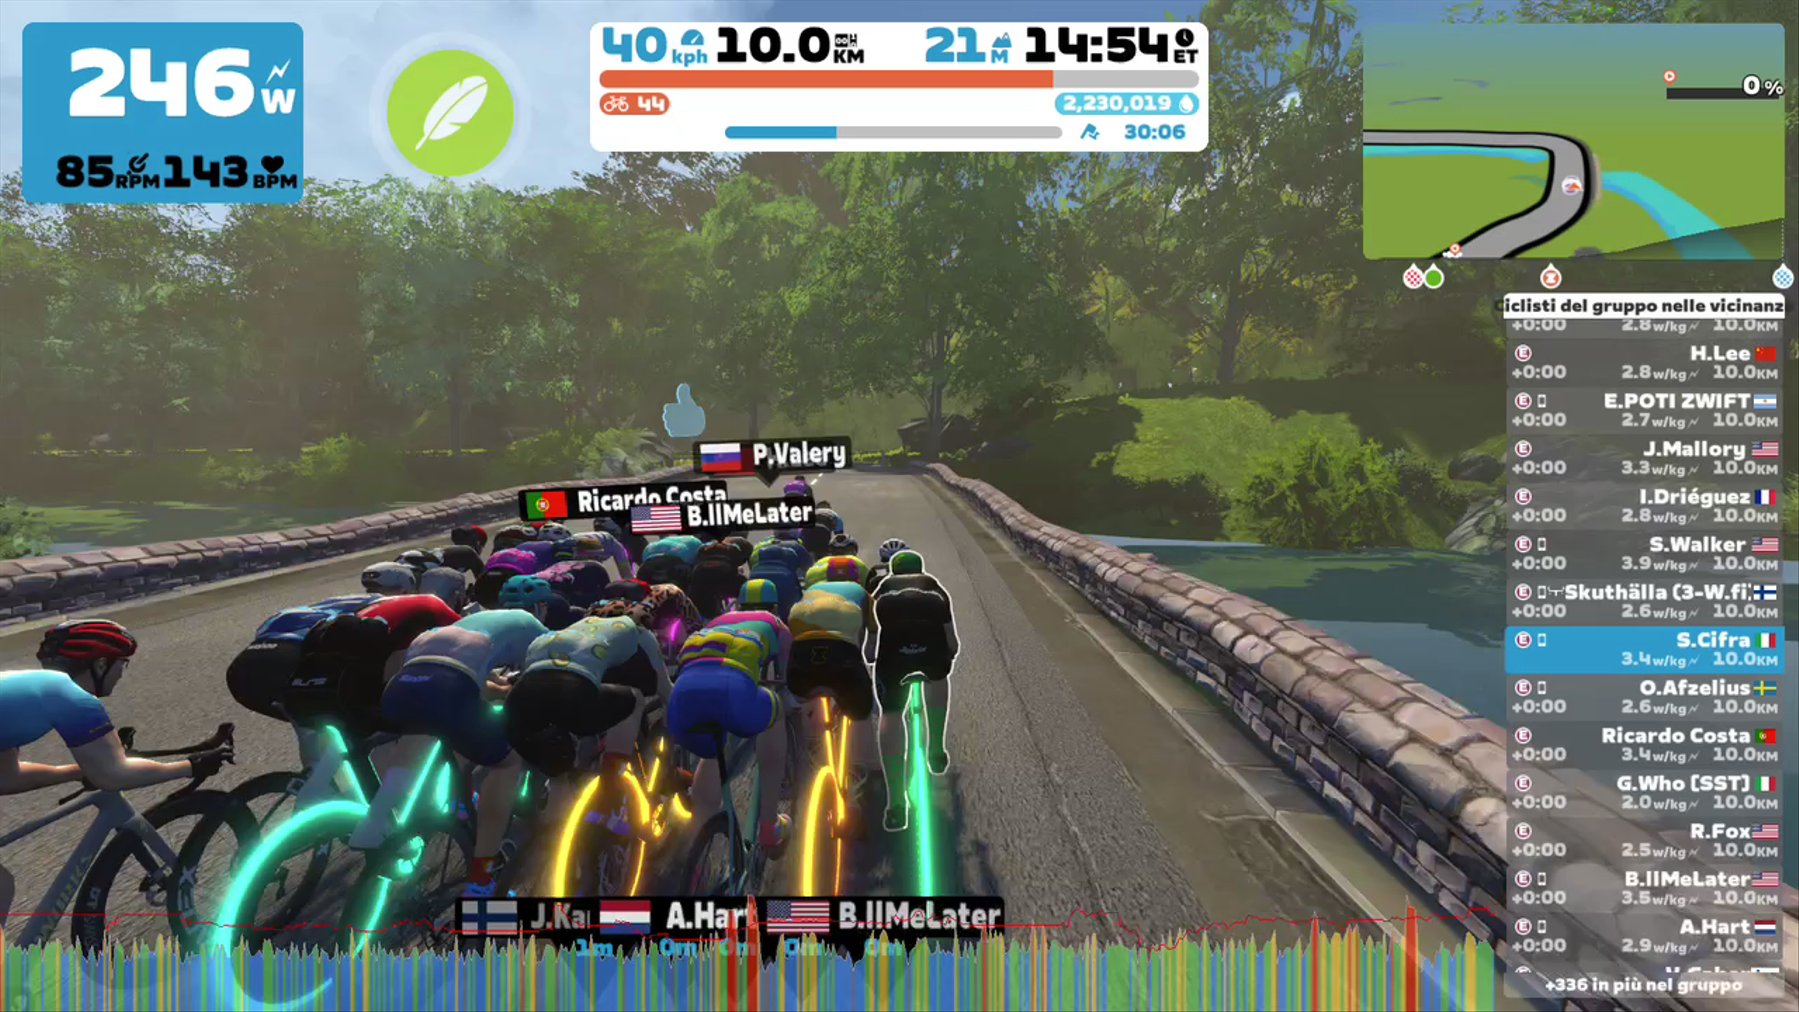 Zwift - Group Ride: The XP Express on R.G.V. in France